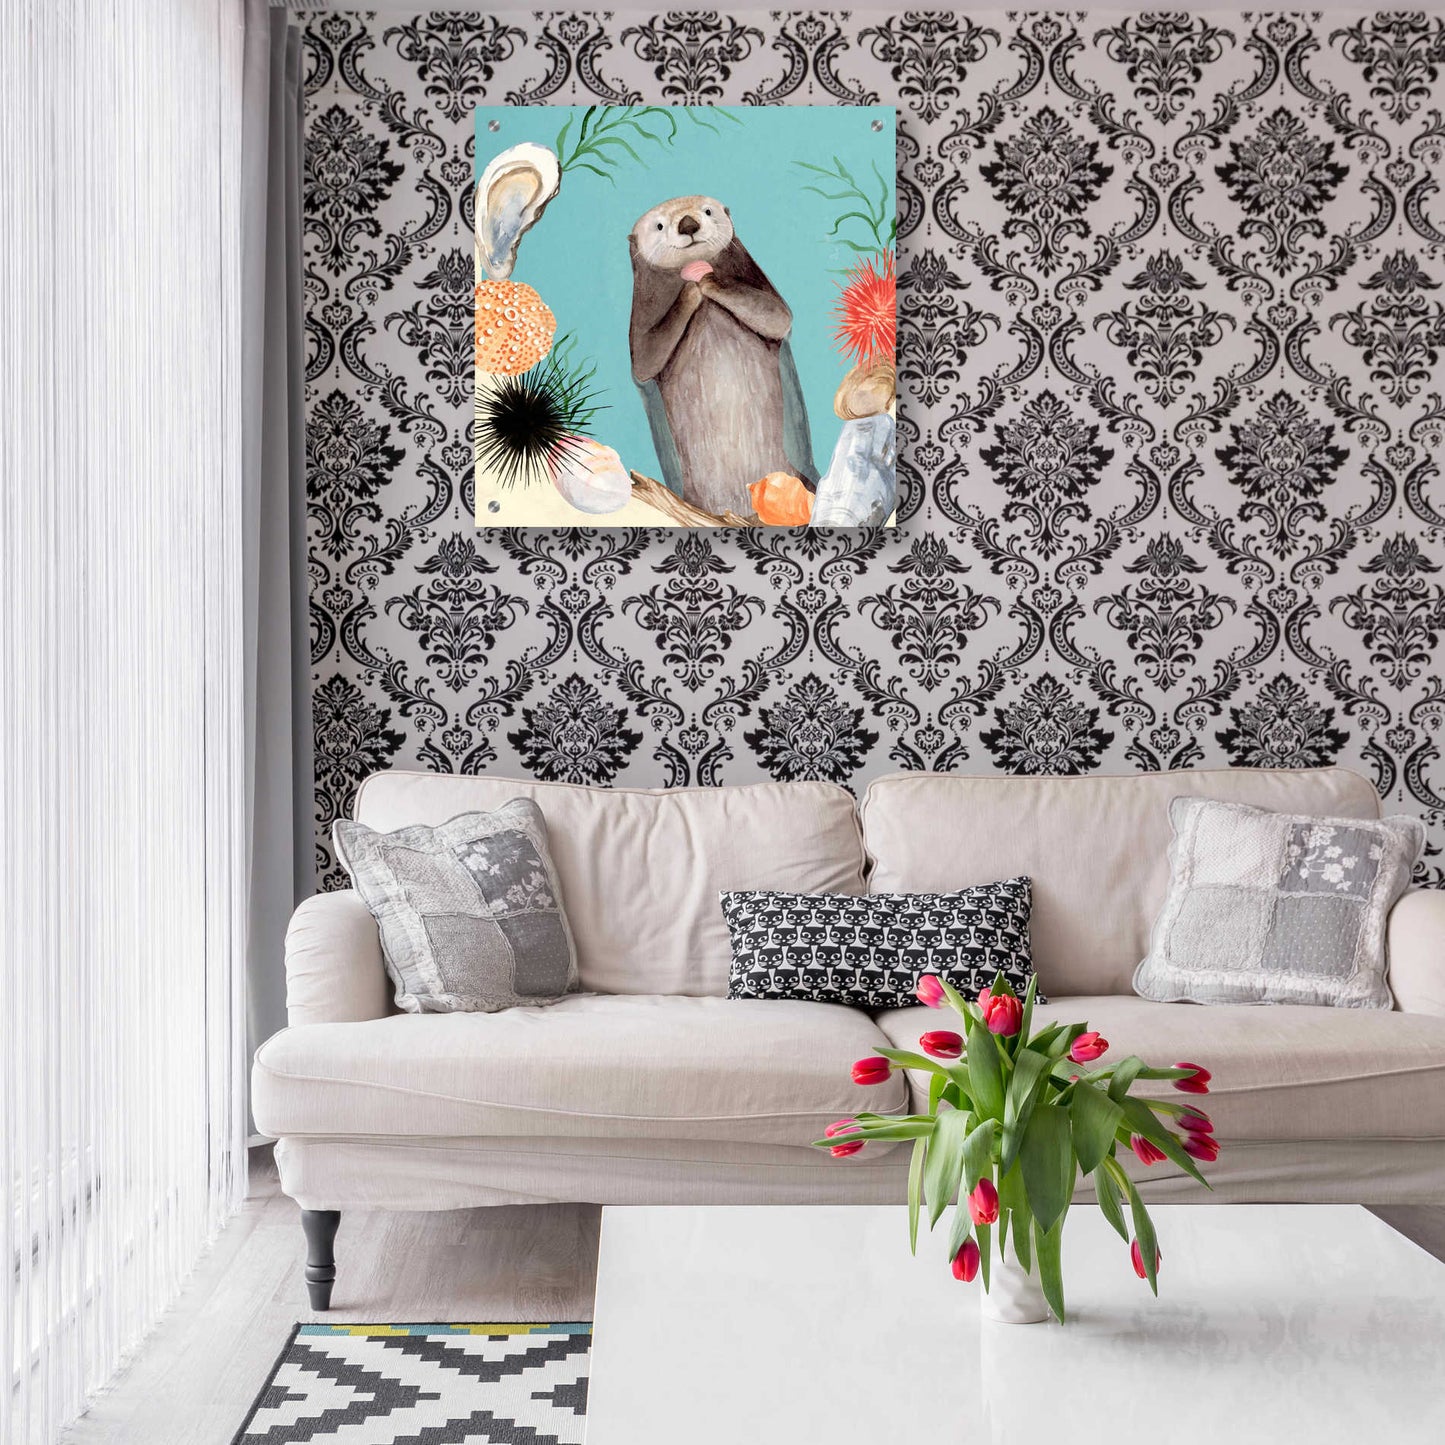 Epic Art 'Otter's Paradise II' by Victoria Borges, Acrylic Glass Wall Art,24x24